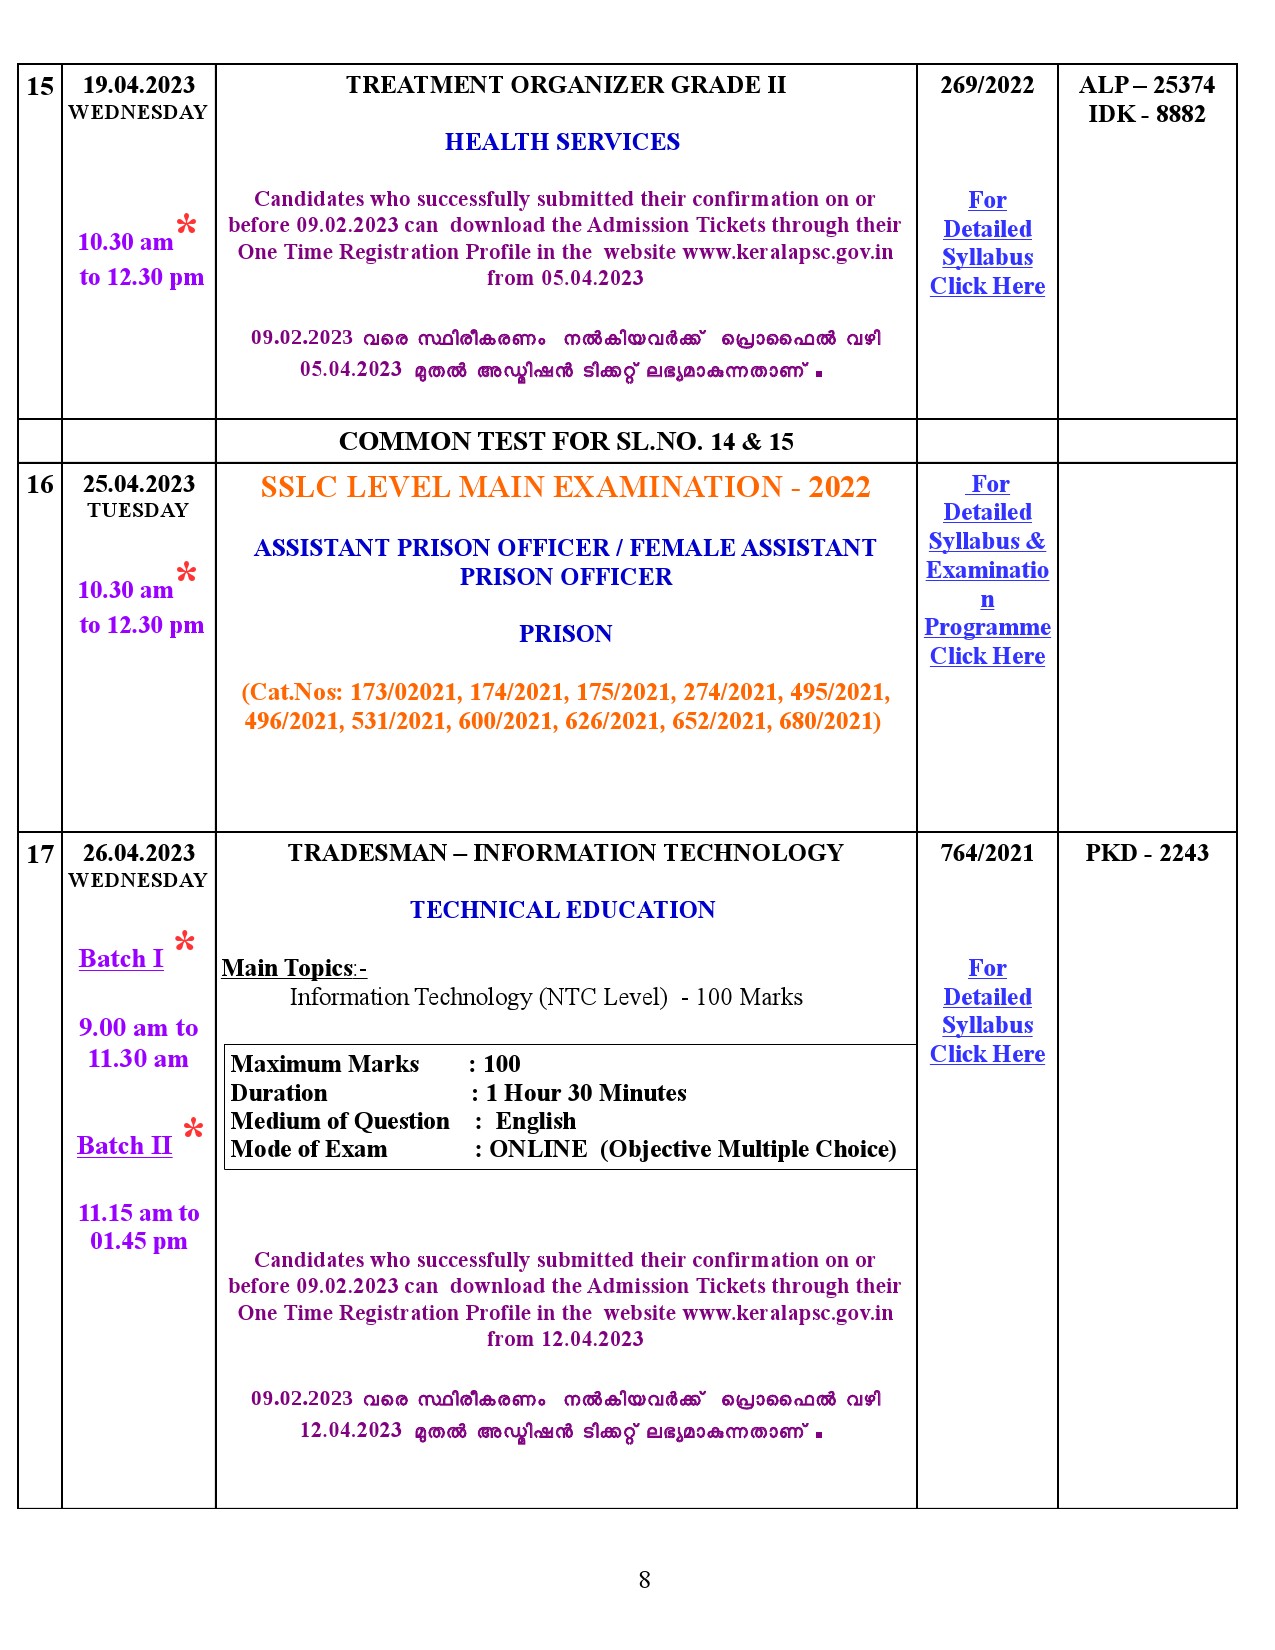 Examination Programme For The Month Of April 2023 - Notification Image 8